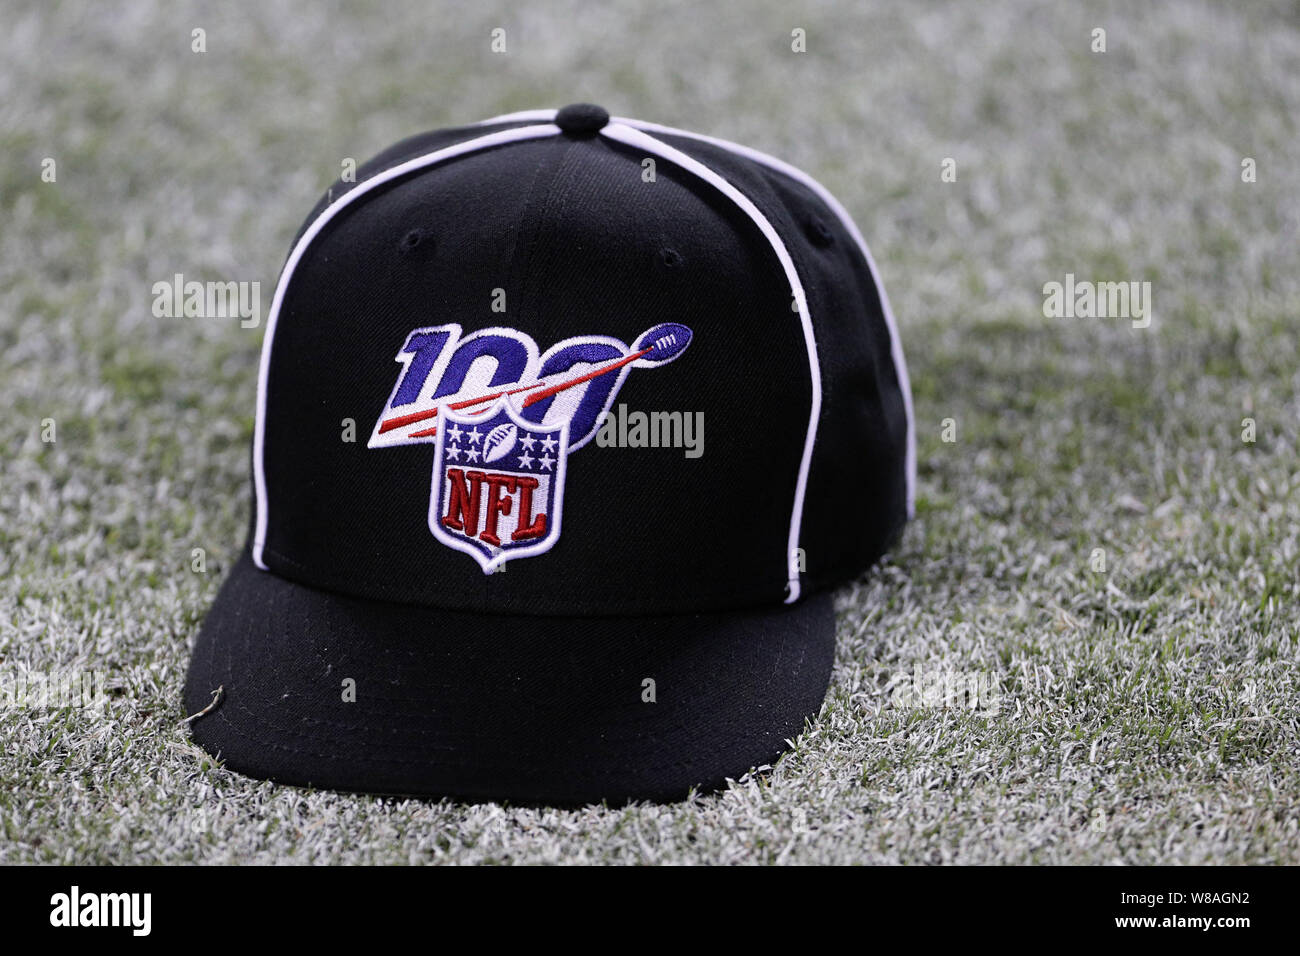 USA. August 8, 2019: A NFL referee hat 